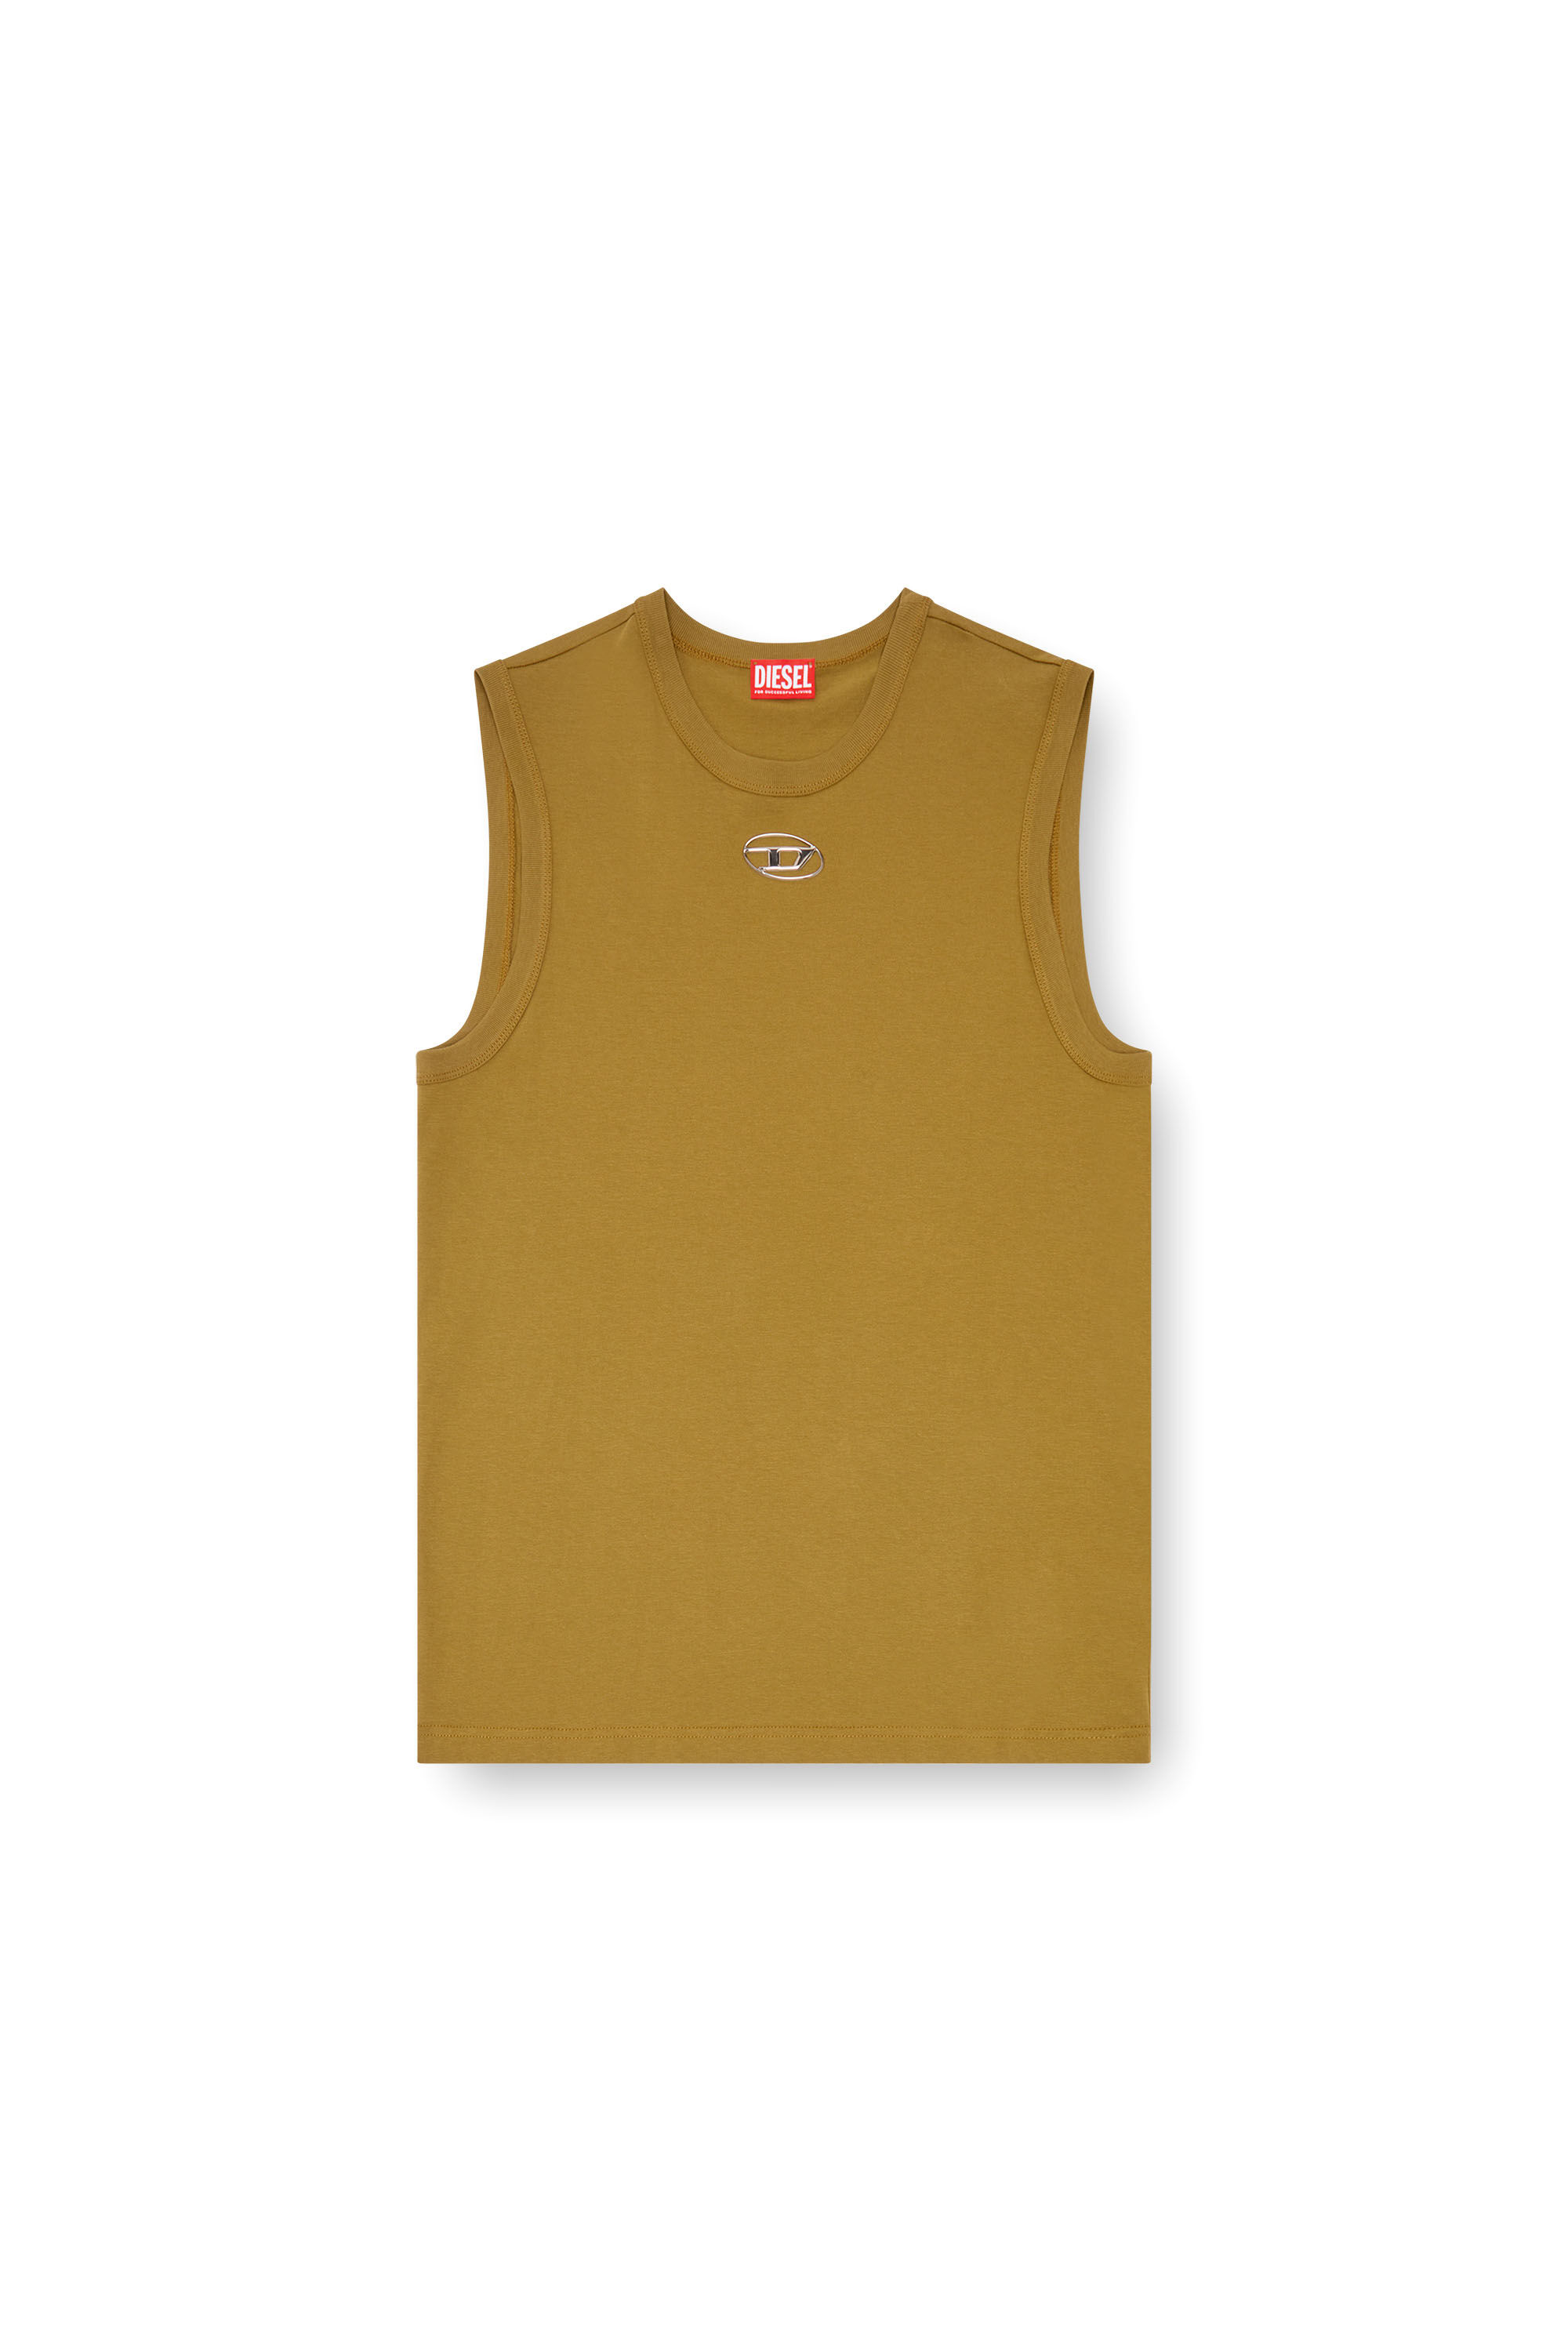 Diesel - T-BISCO-OD, Uomo Tank top with injection-moulded Oval D in ToBeDefined - Image 2